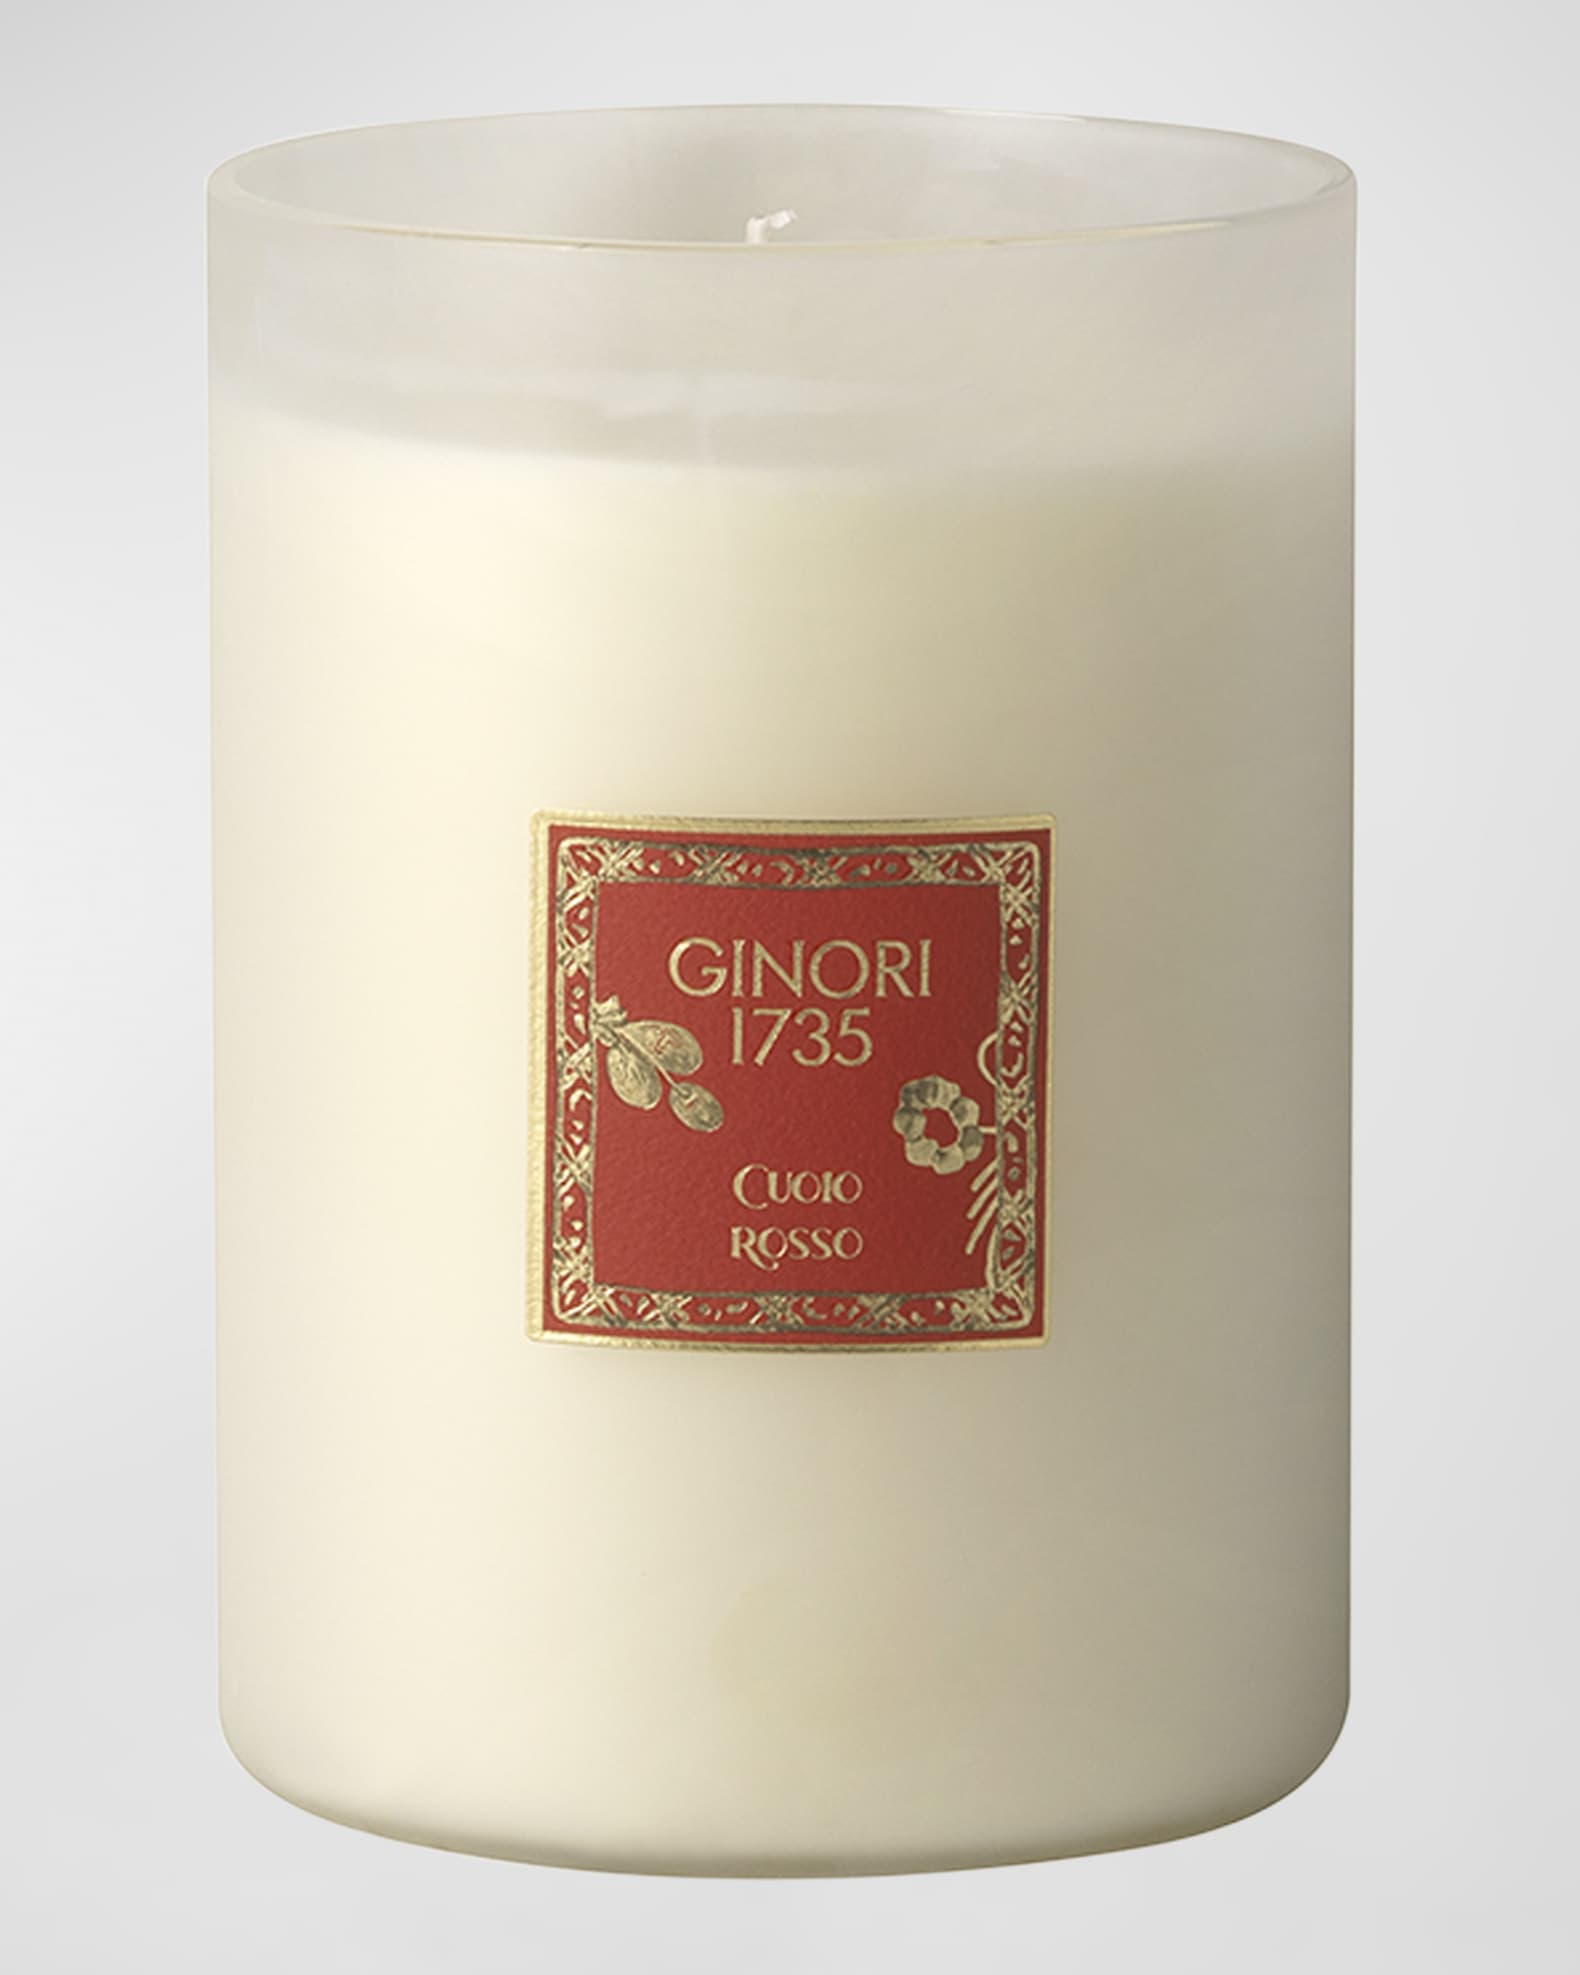 GINORI 1735 Cuoio Rosso Scented Candle Refill for Candleholder